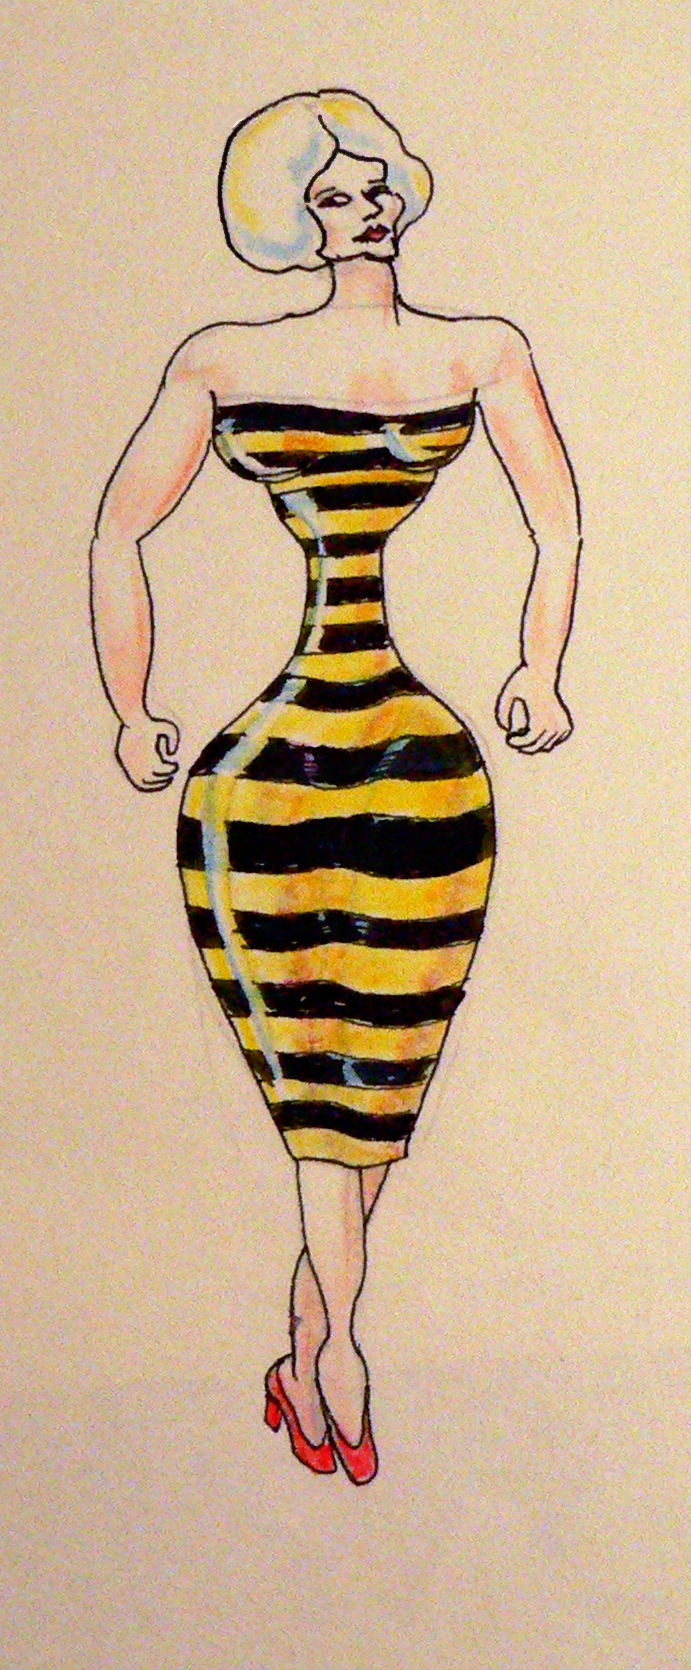 Woman with a wasp-like waist by francish7 on DeviantArt